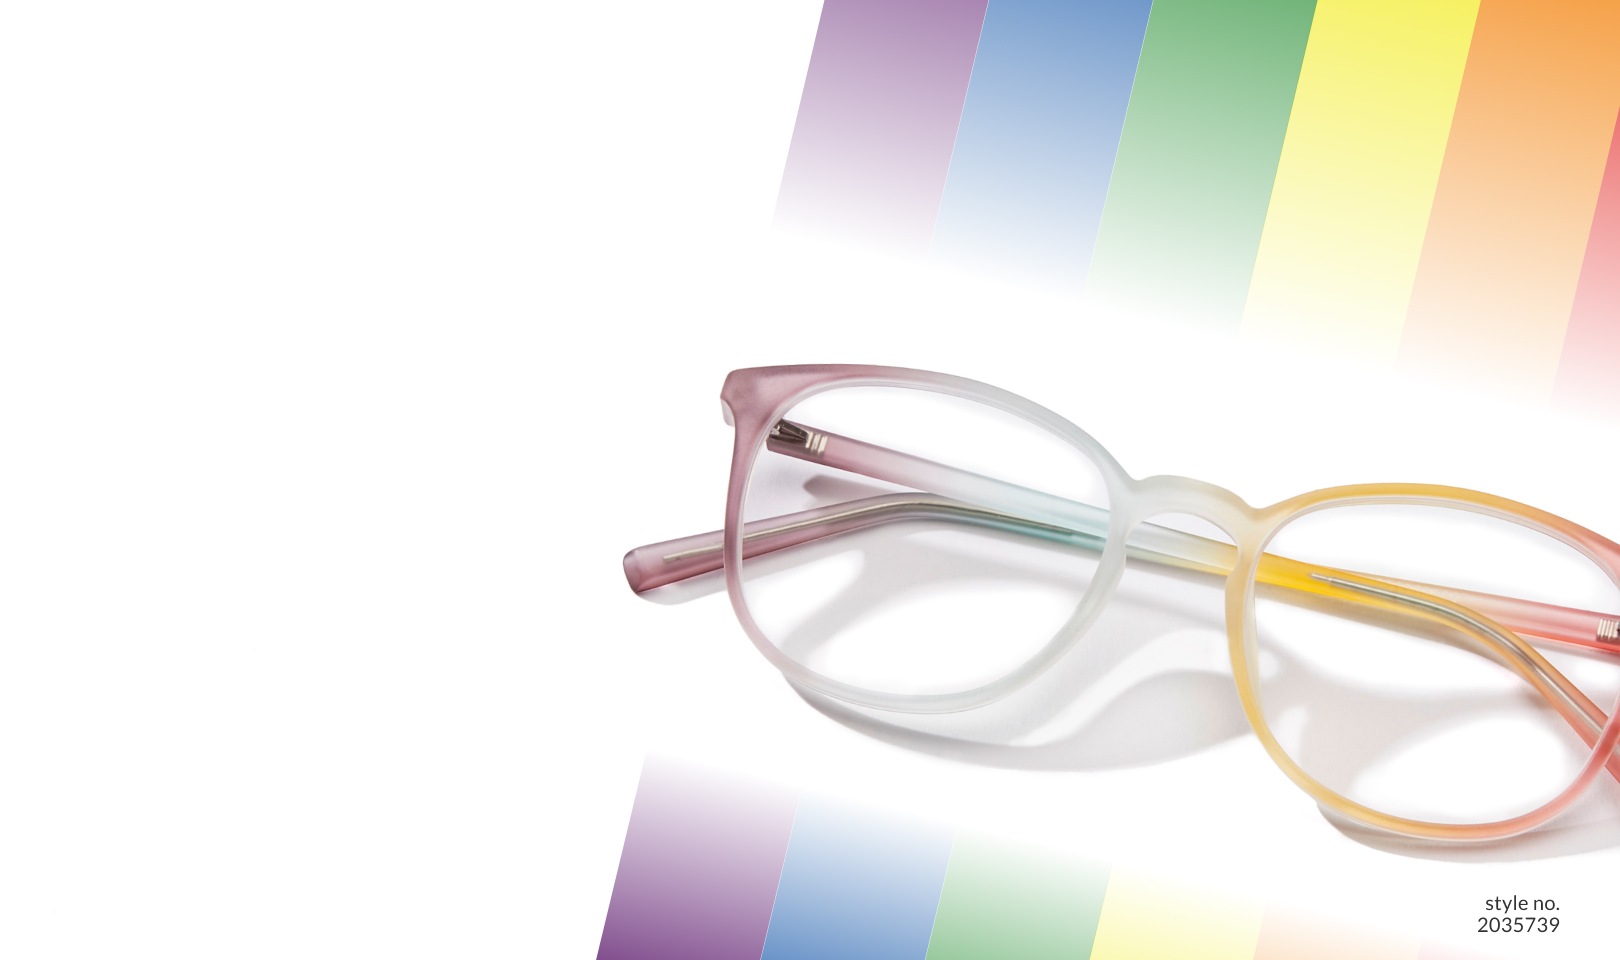 Image of a pair of Zenni kids’ round glasses #4433029 against a roll of purple gift wrap.